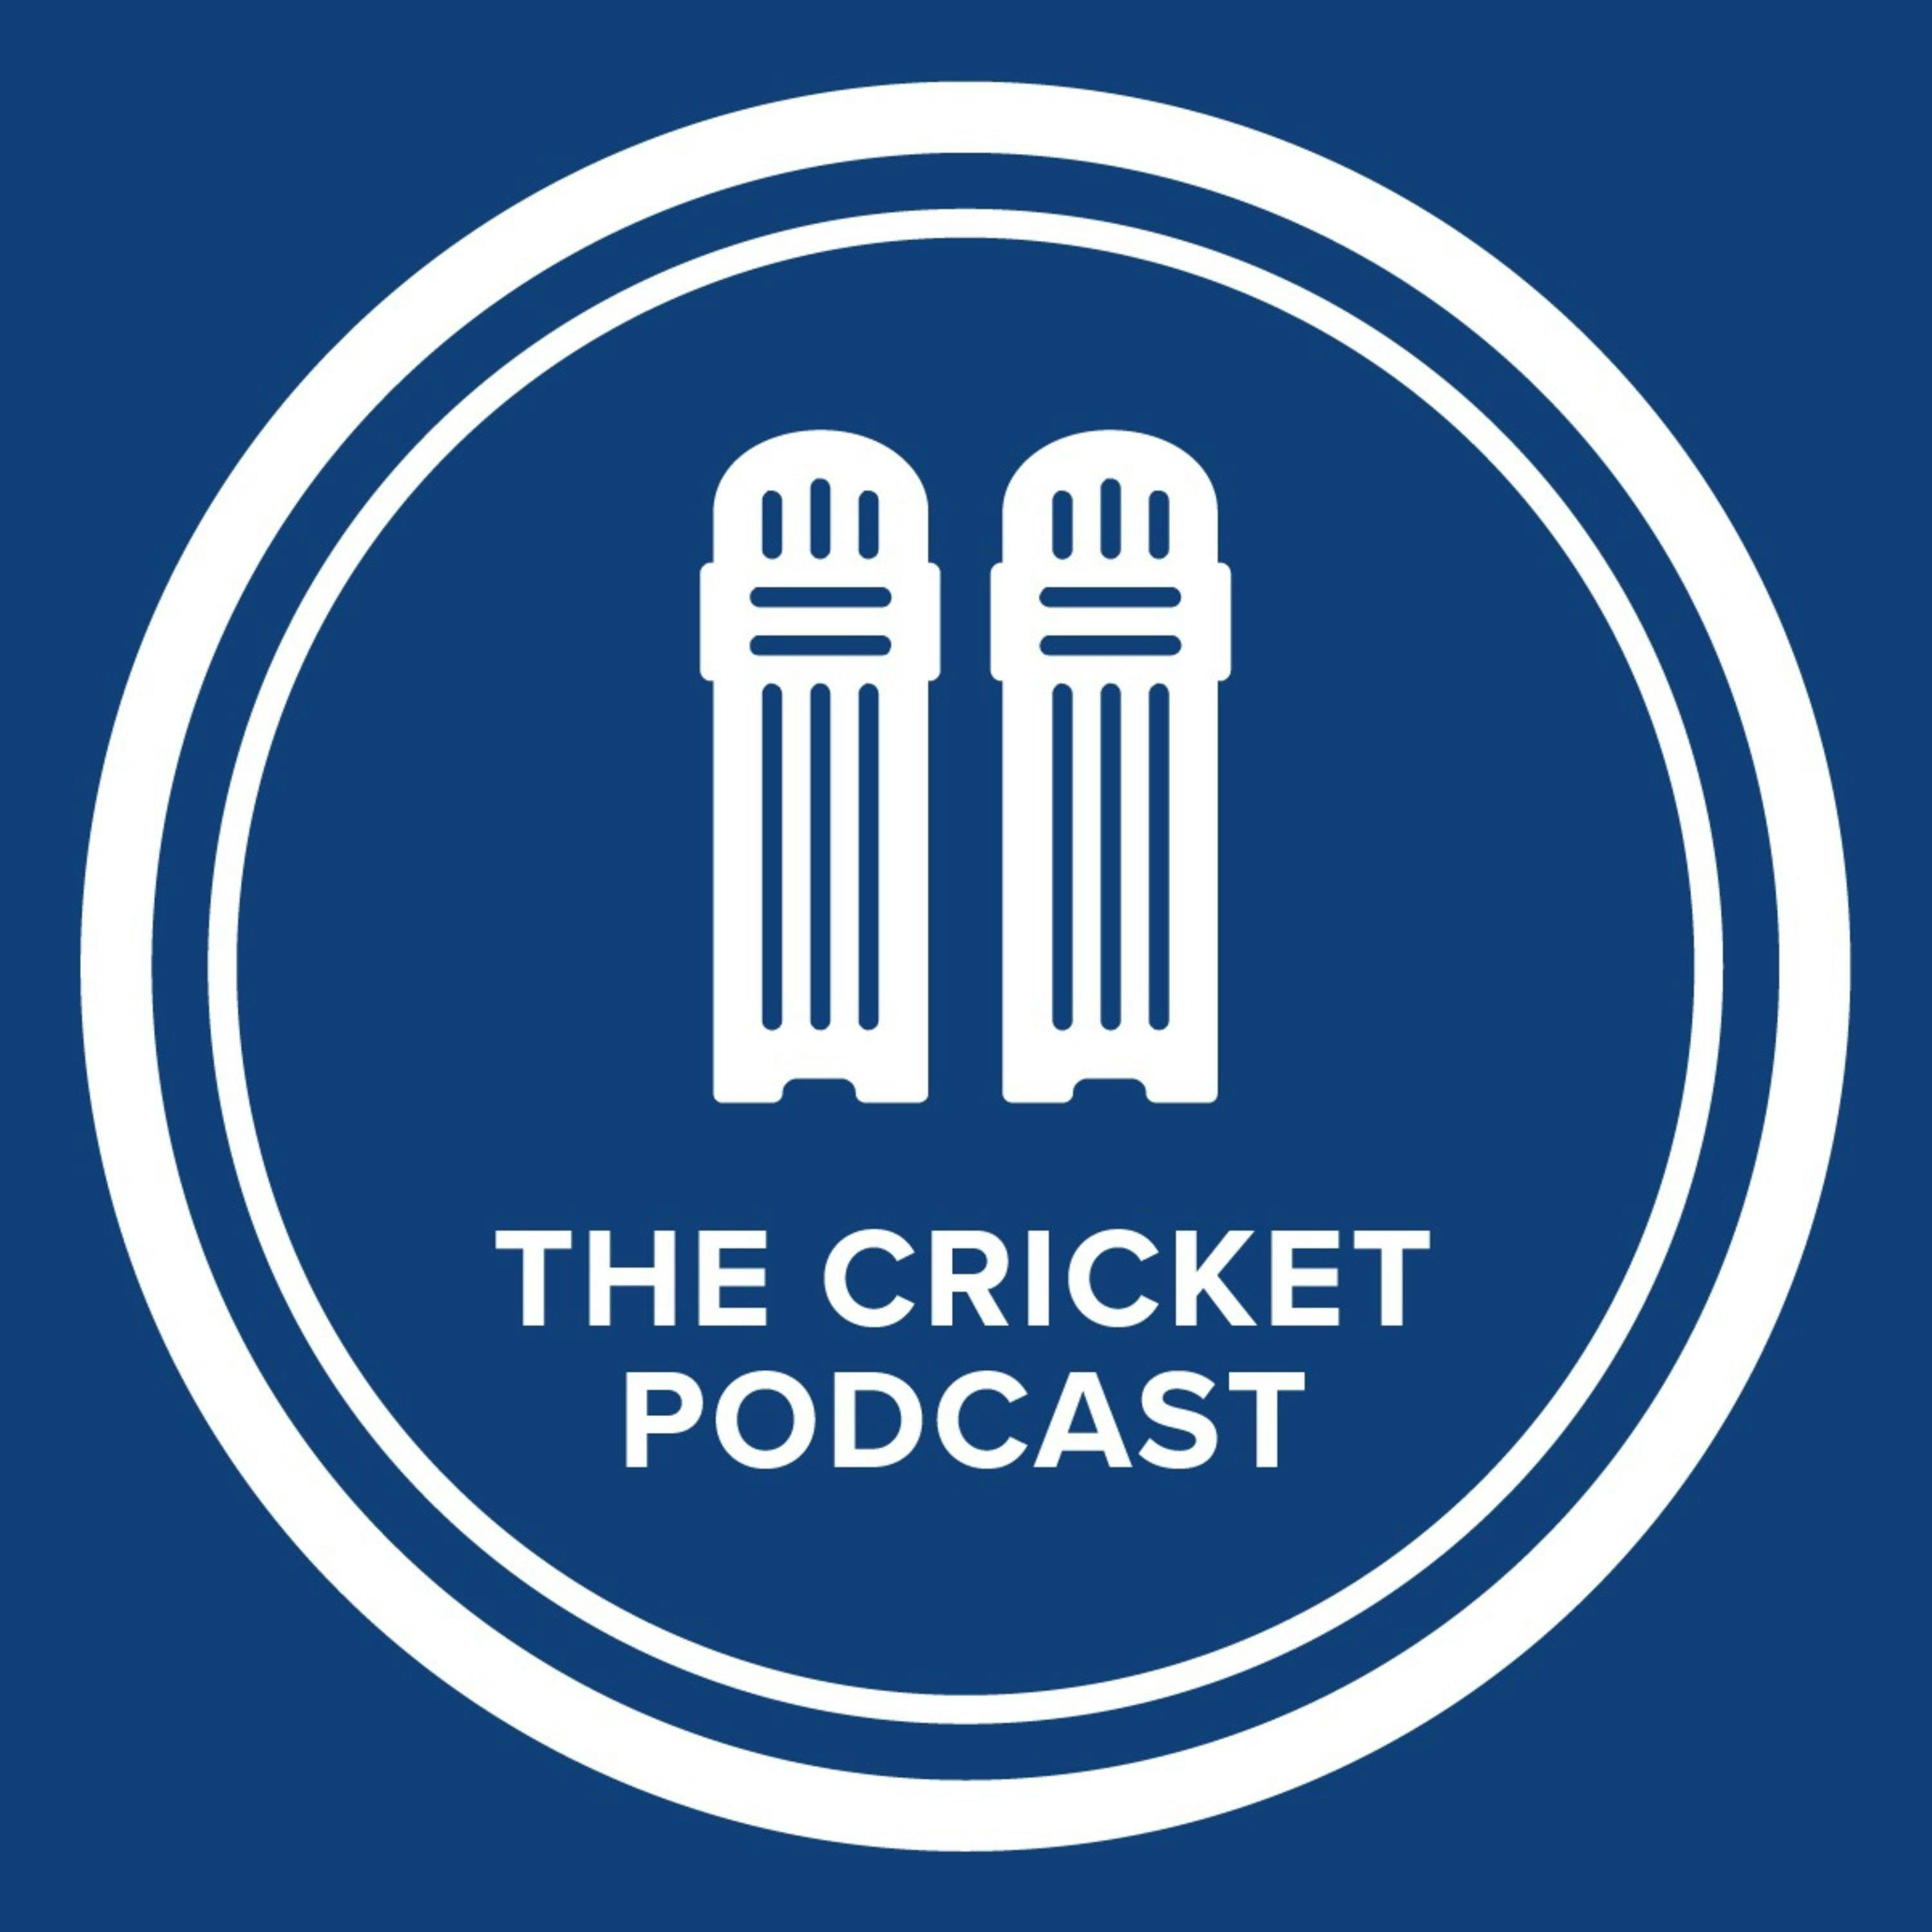 Ep 22: Ashes Squads and First Test Preview